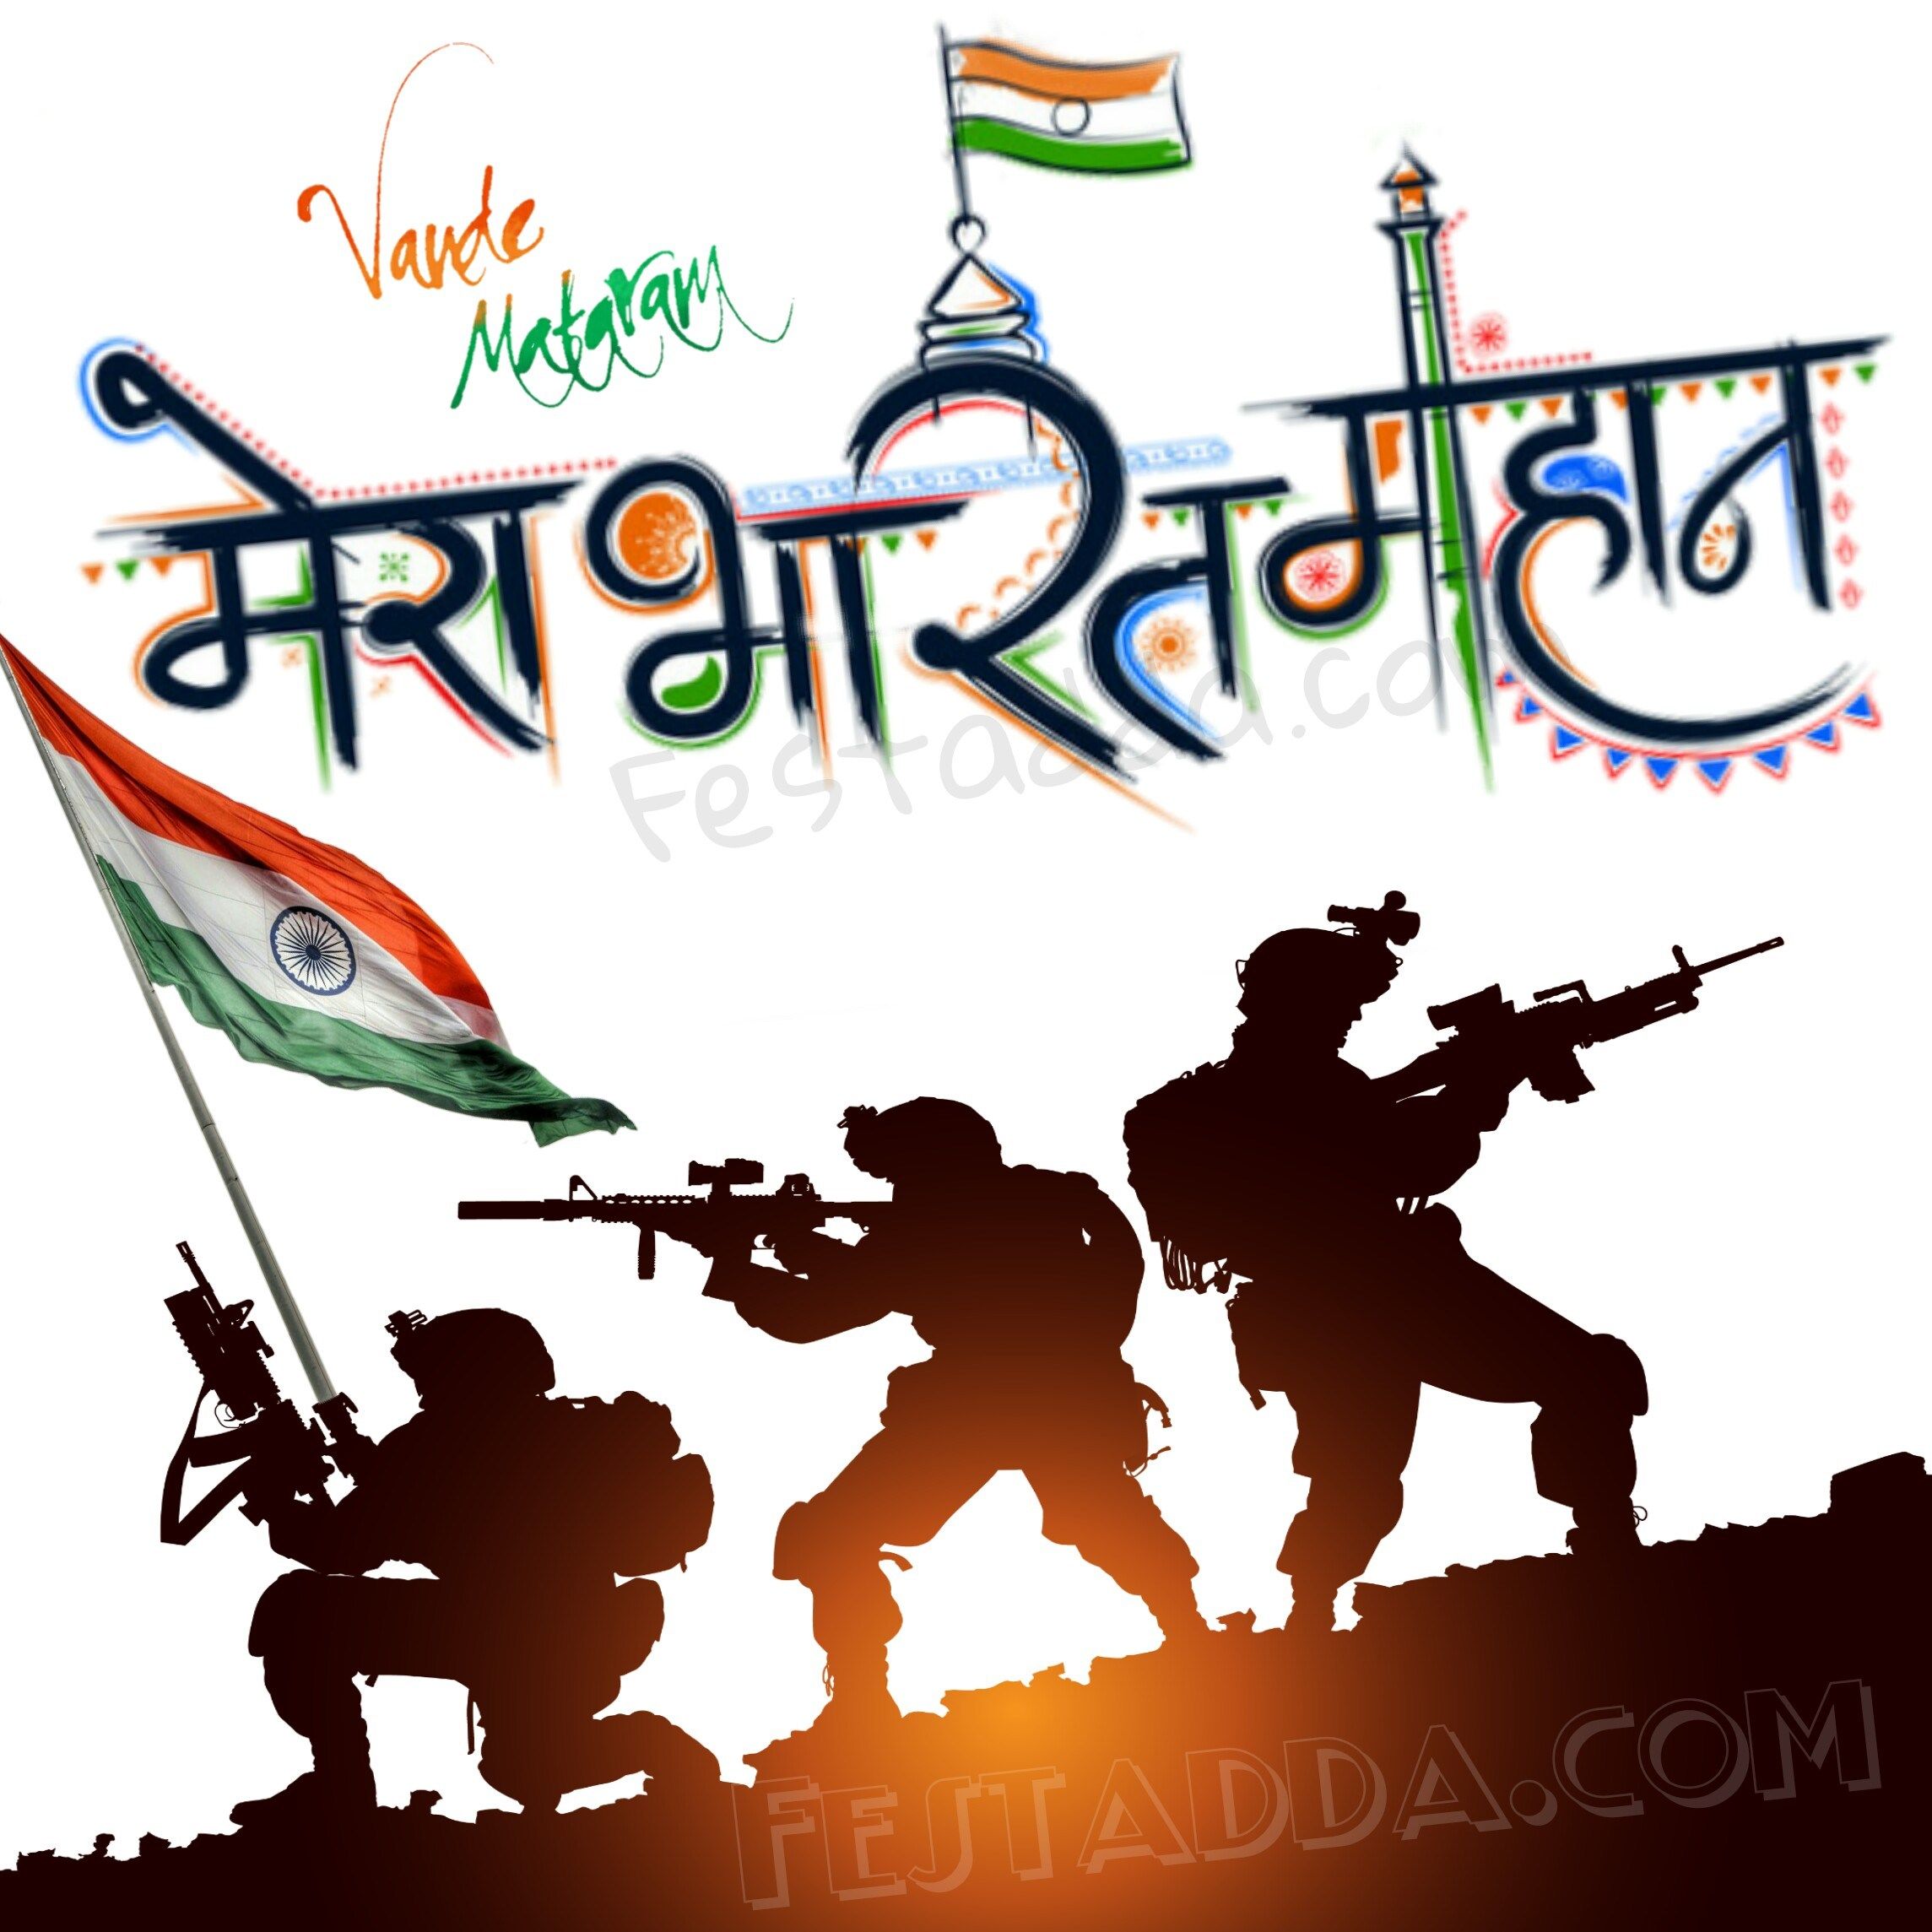 26th January Pics Image Photos In 2021. Indian Flag Wallpaper, Indian Army Wallpaper, Army Image